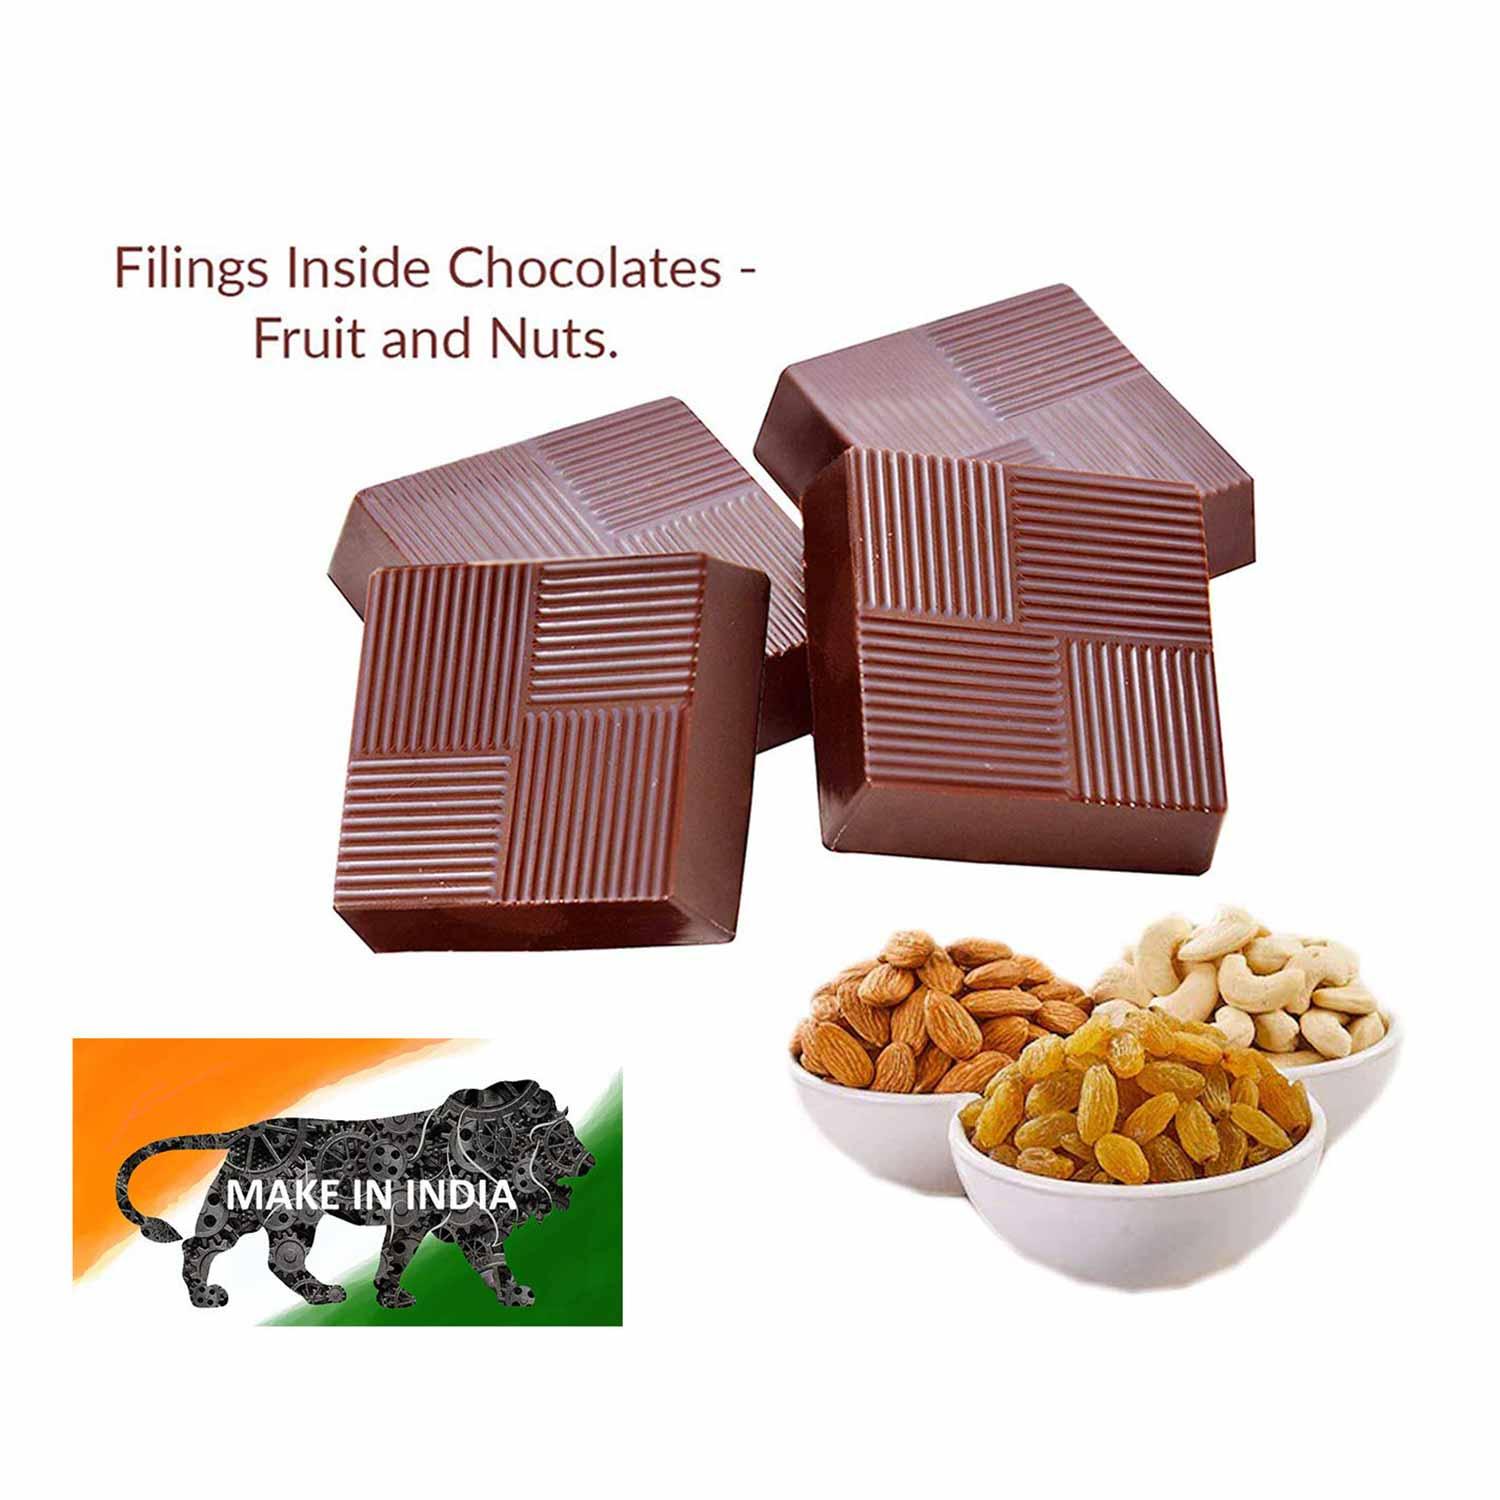 customized chocolates with photo printed on wrapper - Choco Manual ART